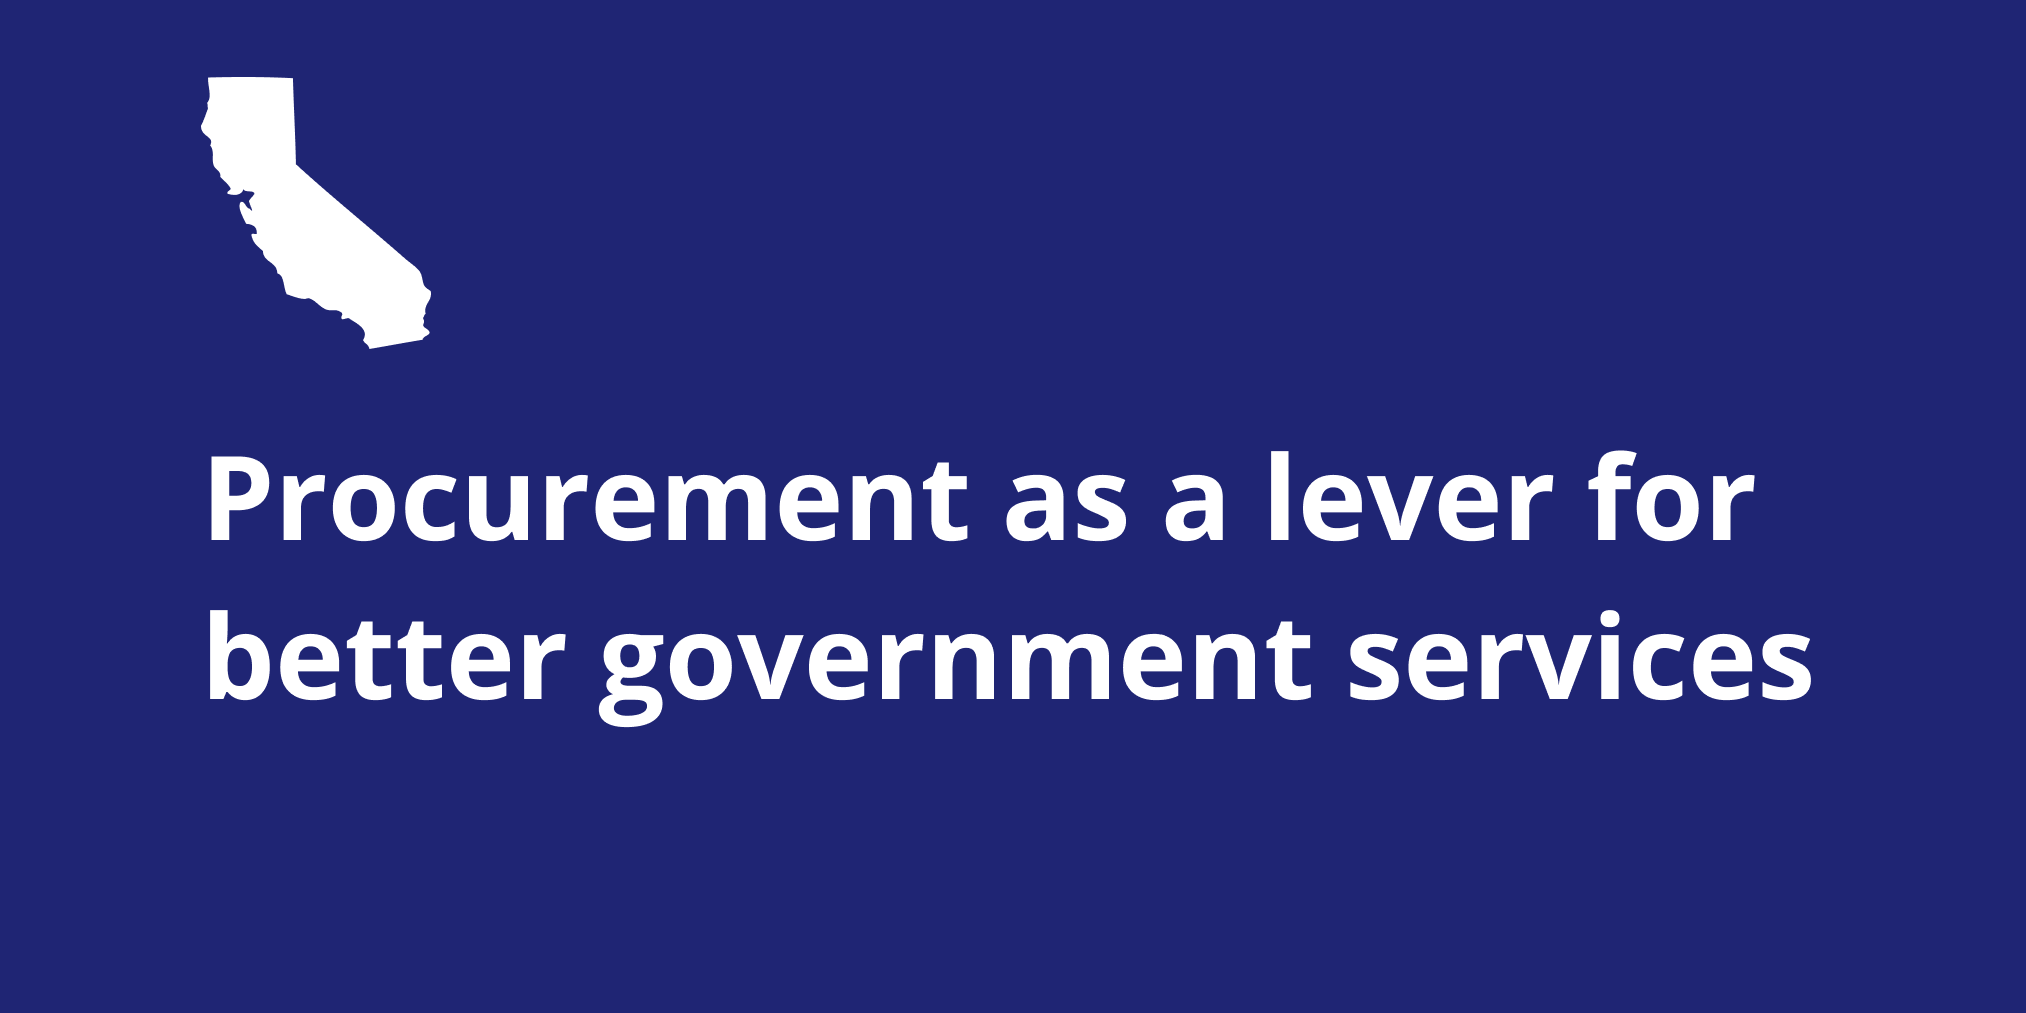 Procurement as a lever for better government services